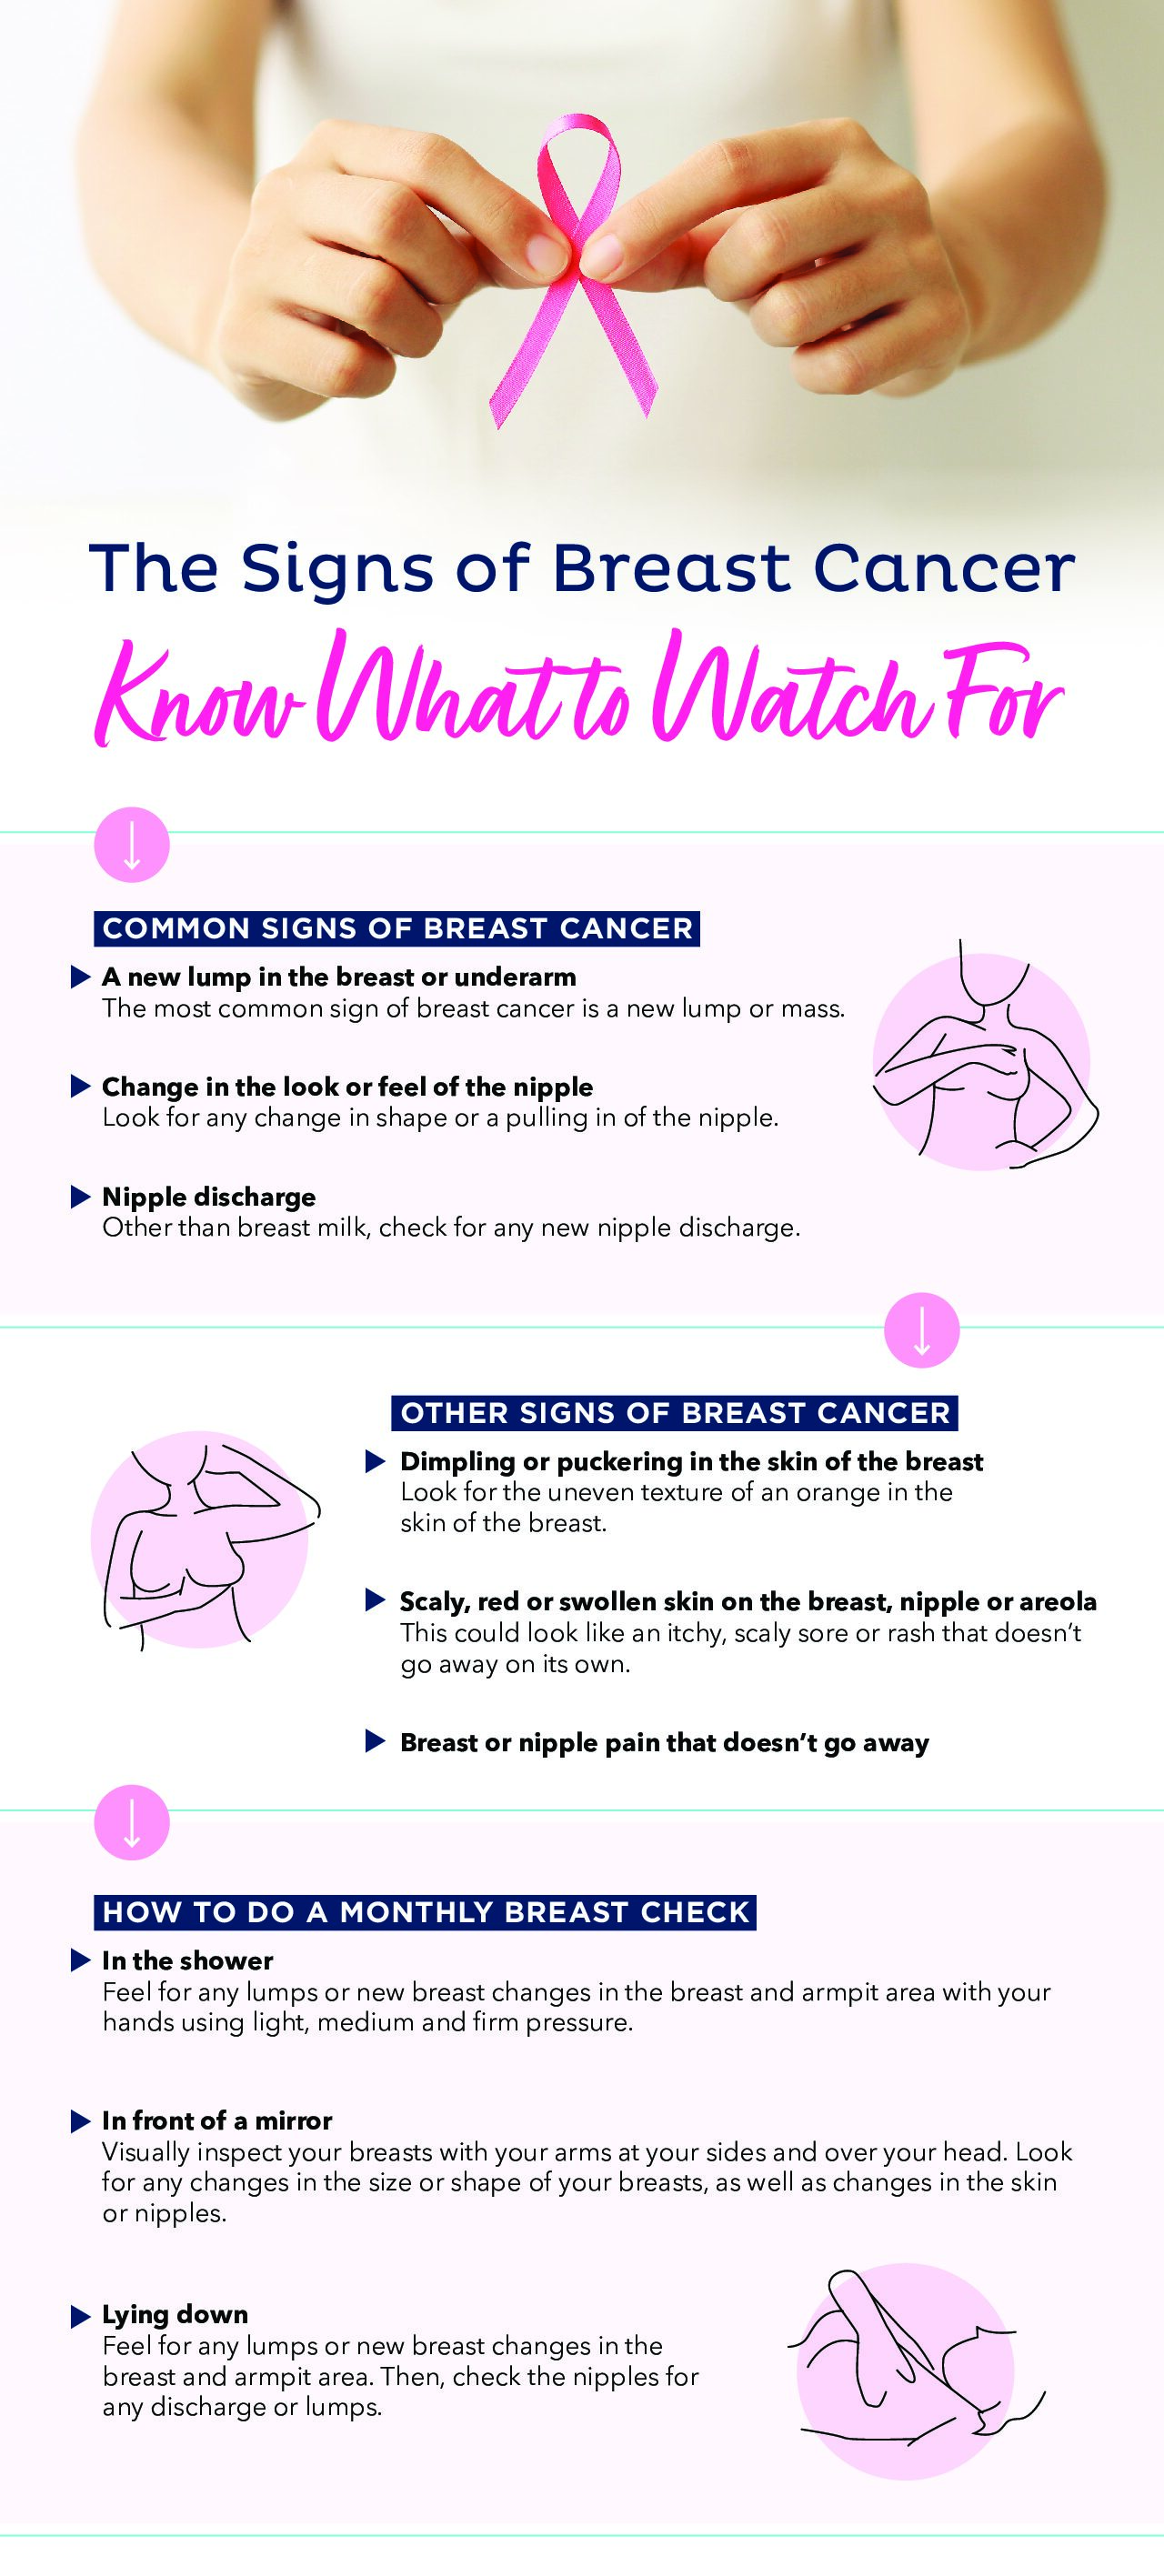 What Does Breast Cancer Feel Like?